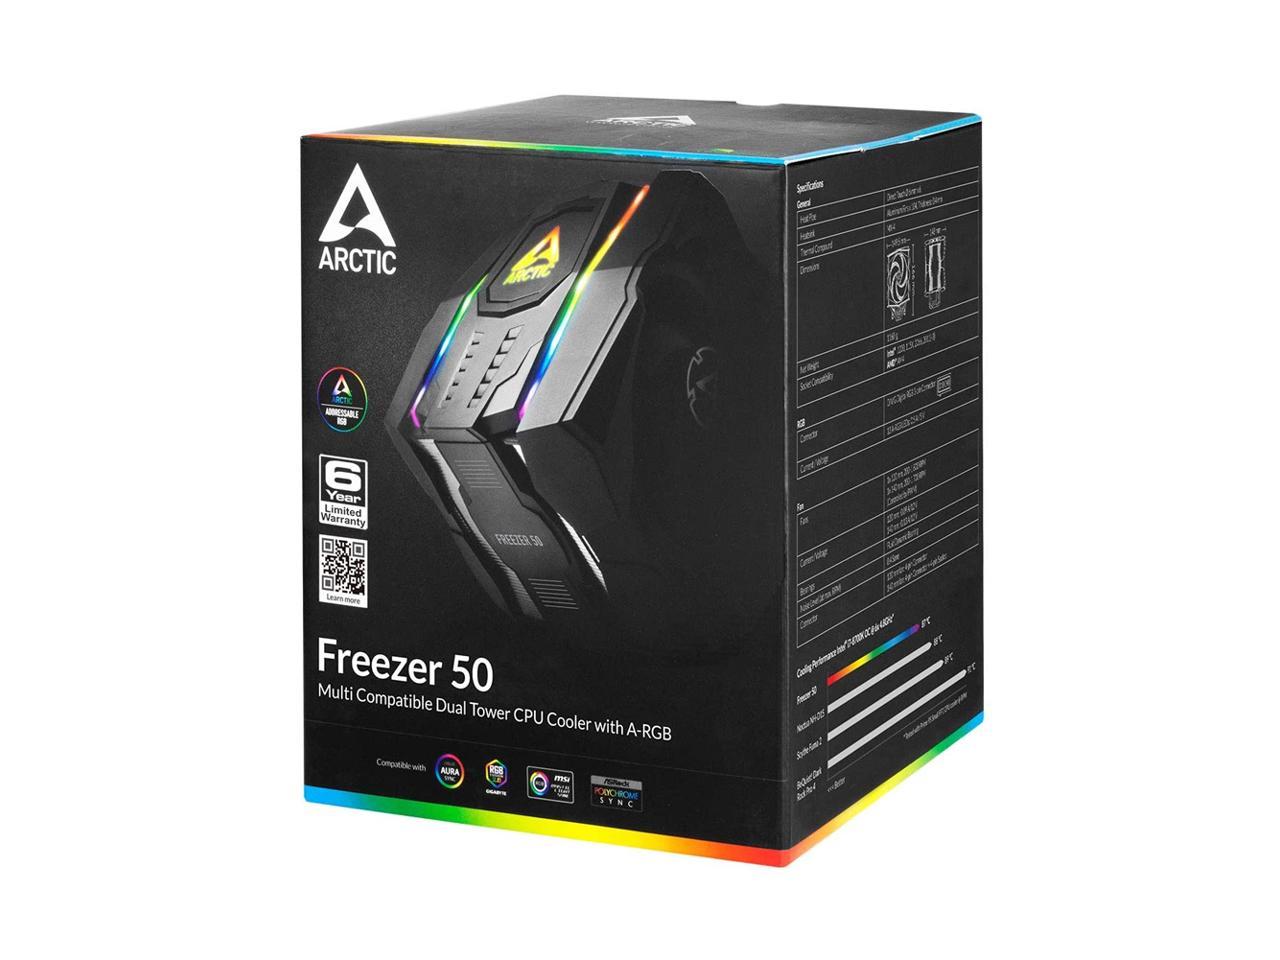 Arctic Freezer 50 Multi Compatible Dual Tower Cpu Cooler With A-Rgb